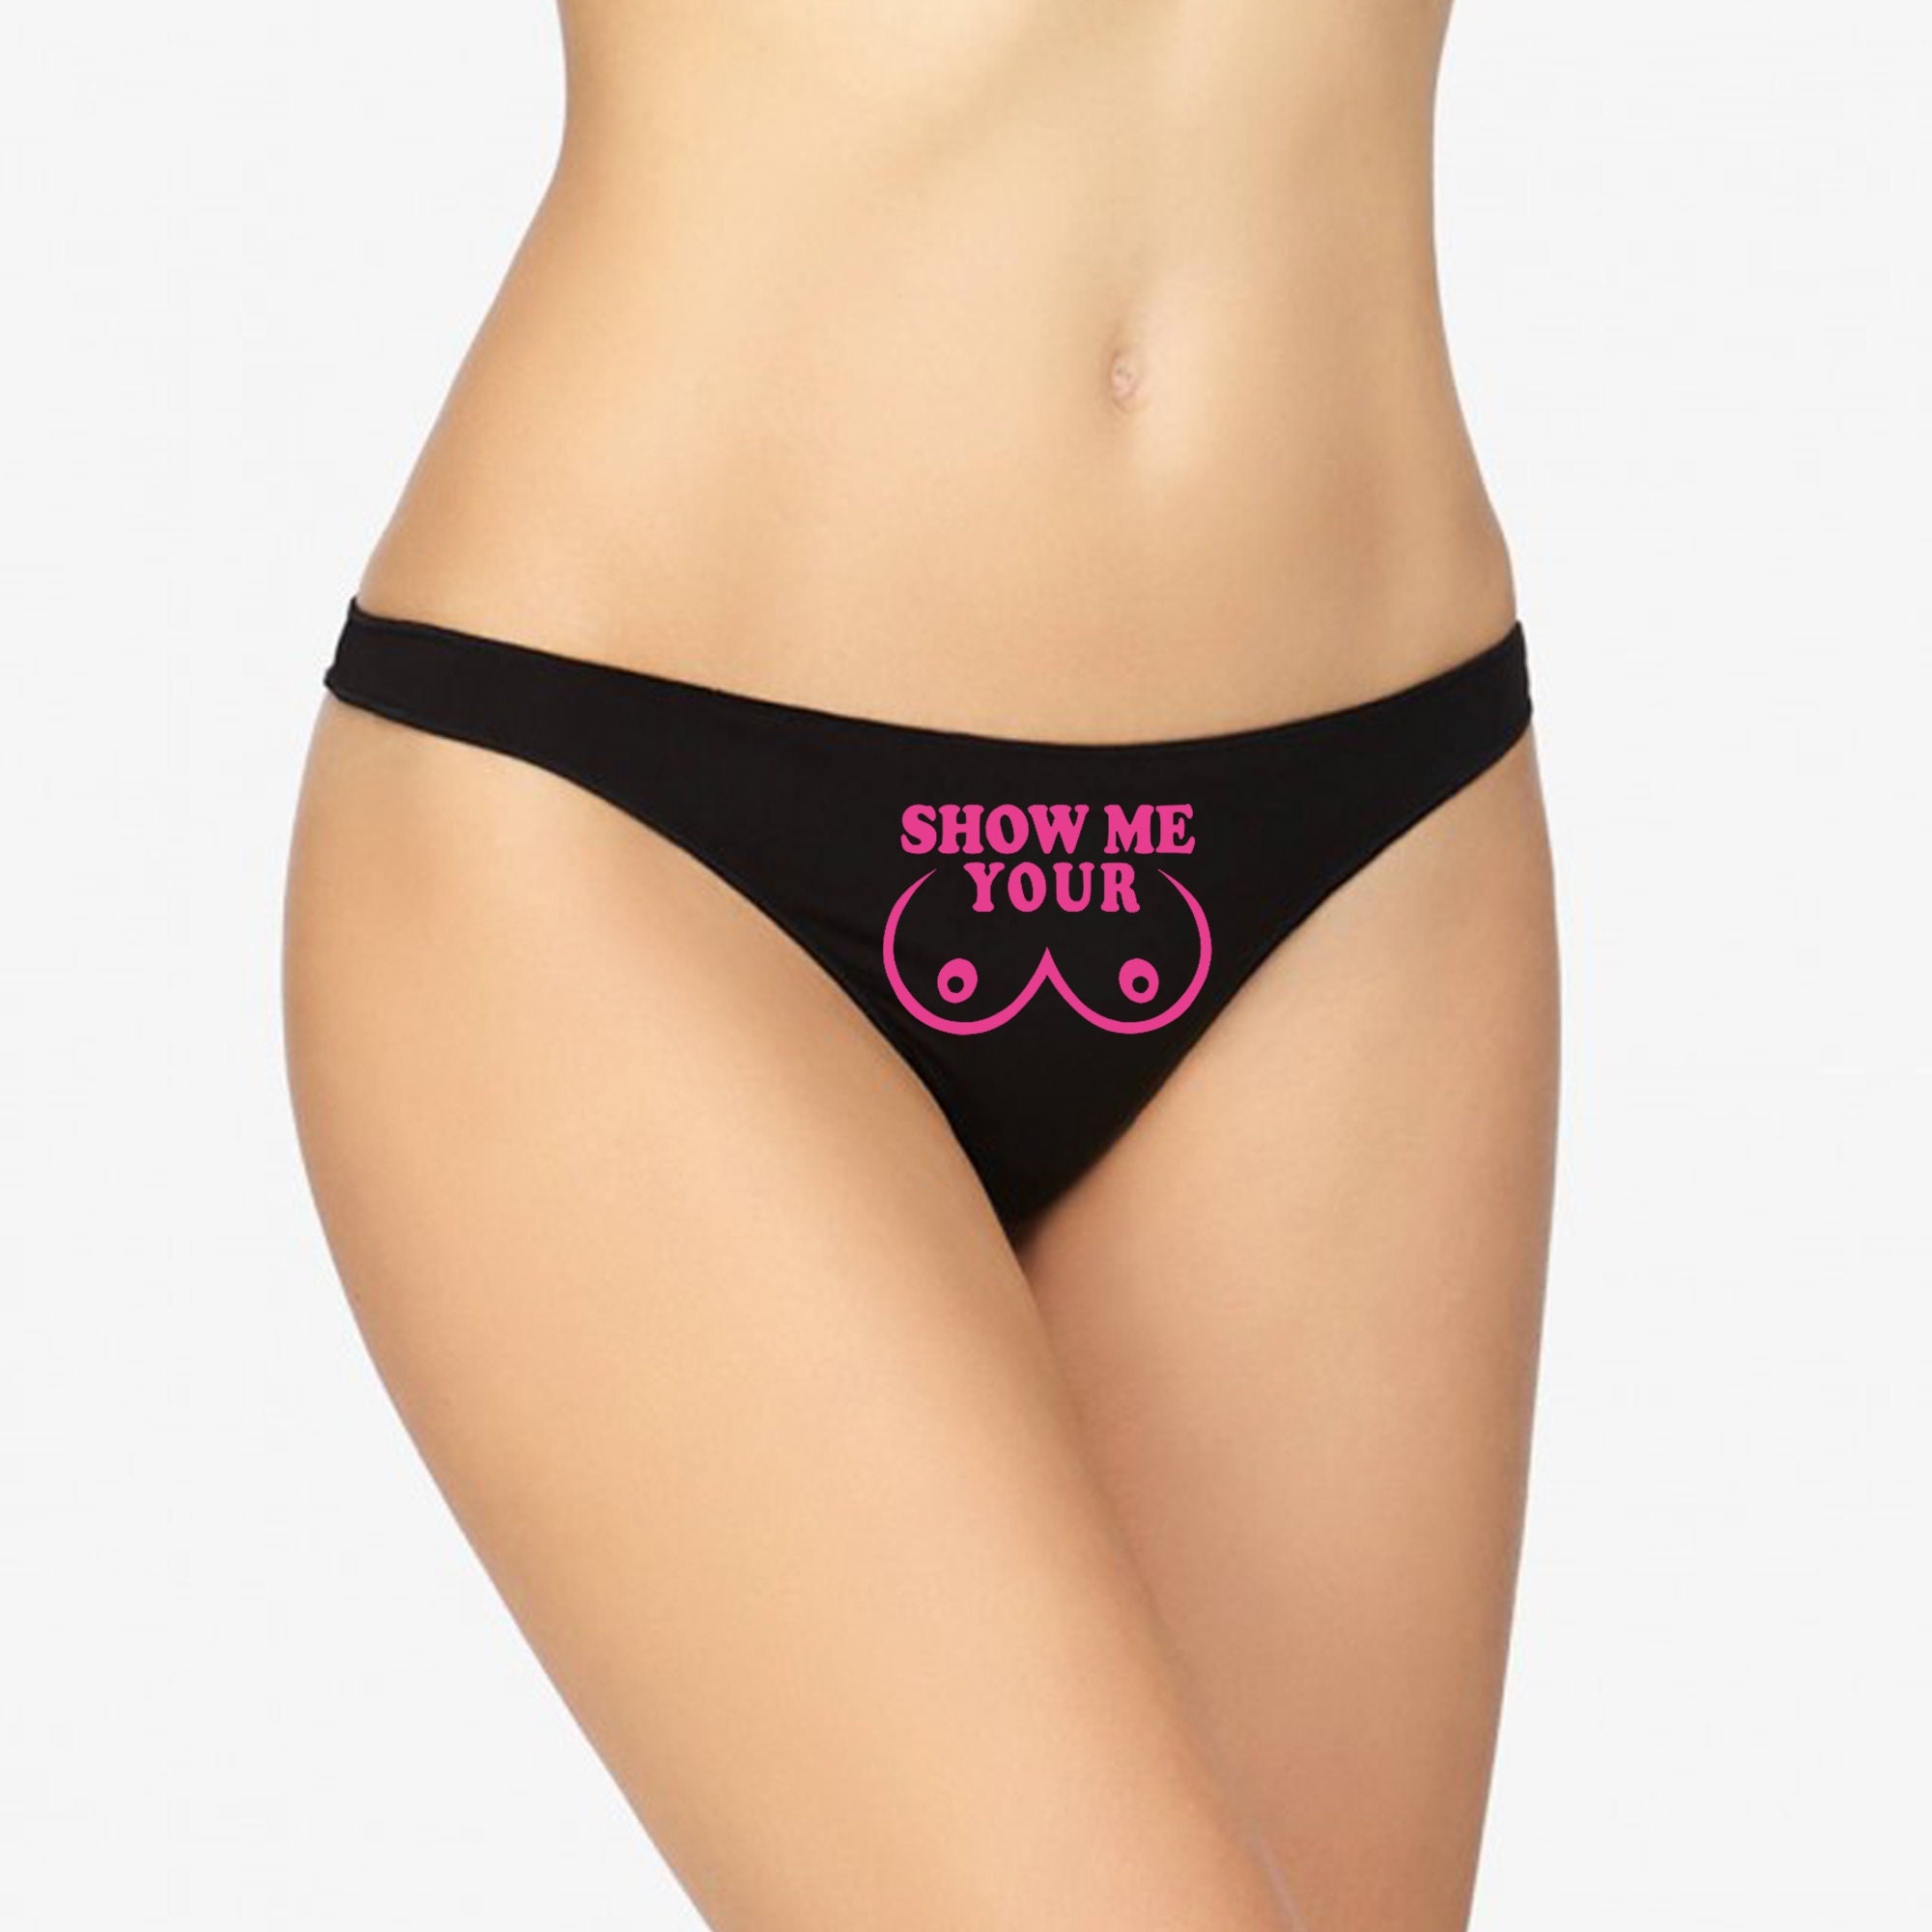 Show Me Your Boobs Thong Sexy Christmas Gift Funny Naughty Slutty